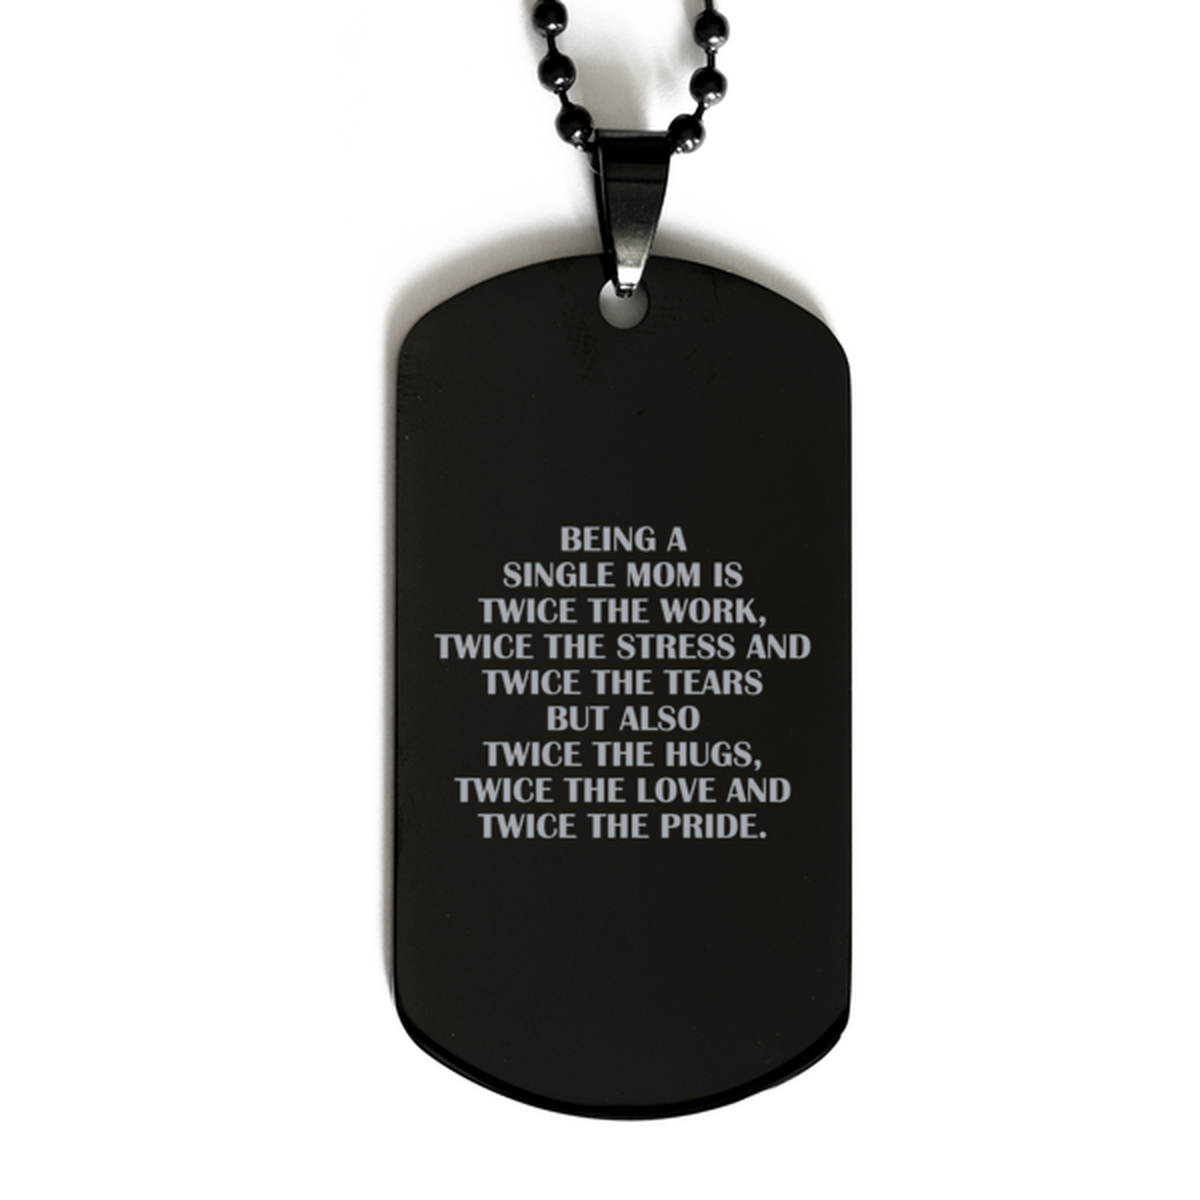 To My Single Mom Black Dog Tag, Twice The Work, Mothers Day Gifts For Single Mom From Friends, Birthday Gifts For Women